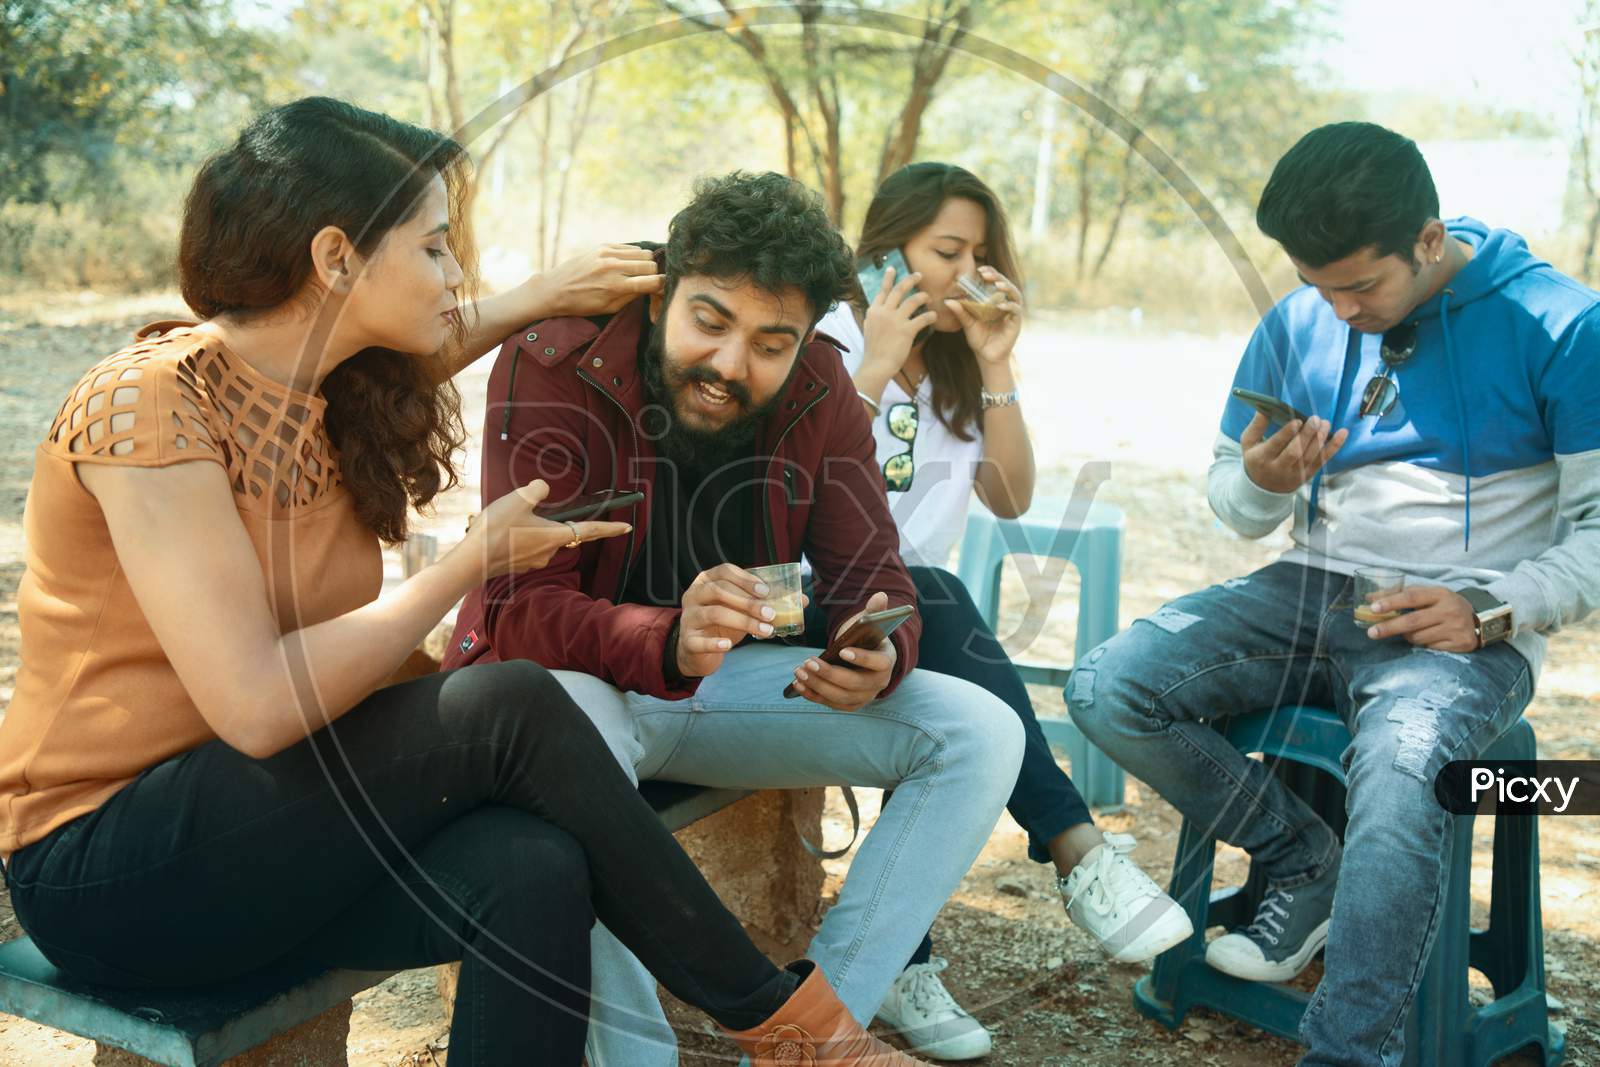 Group of Happy Young People using Smartphone while having Tea